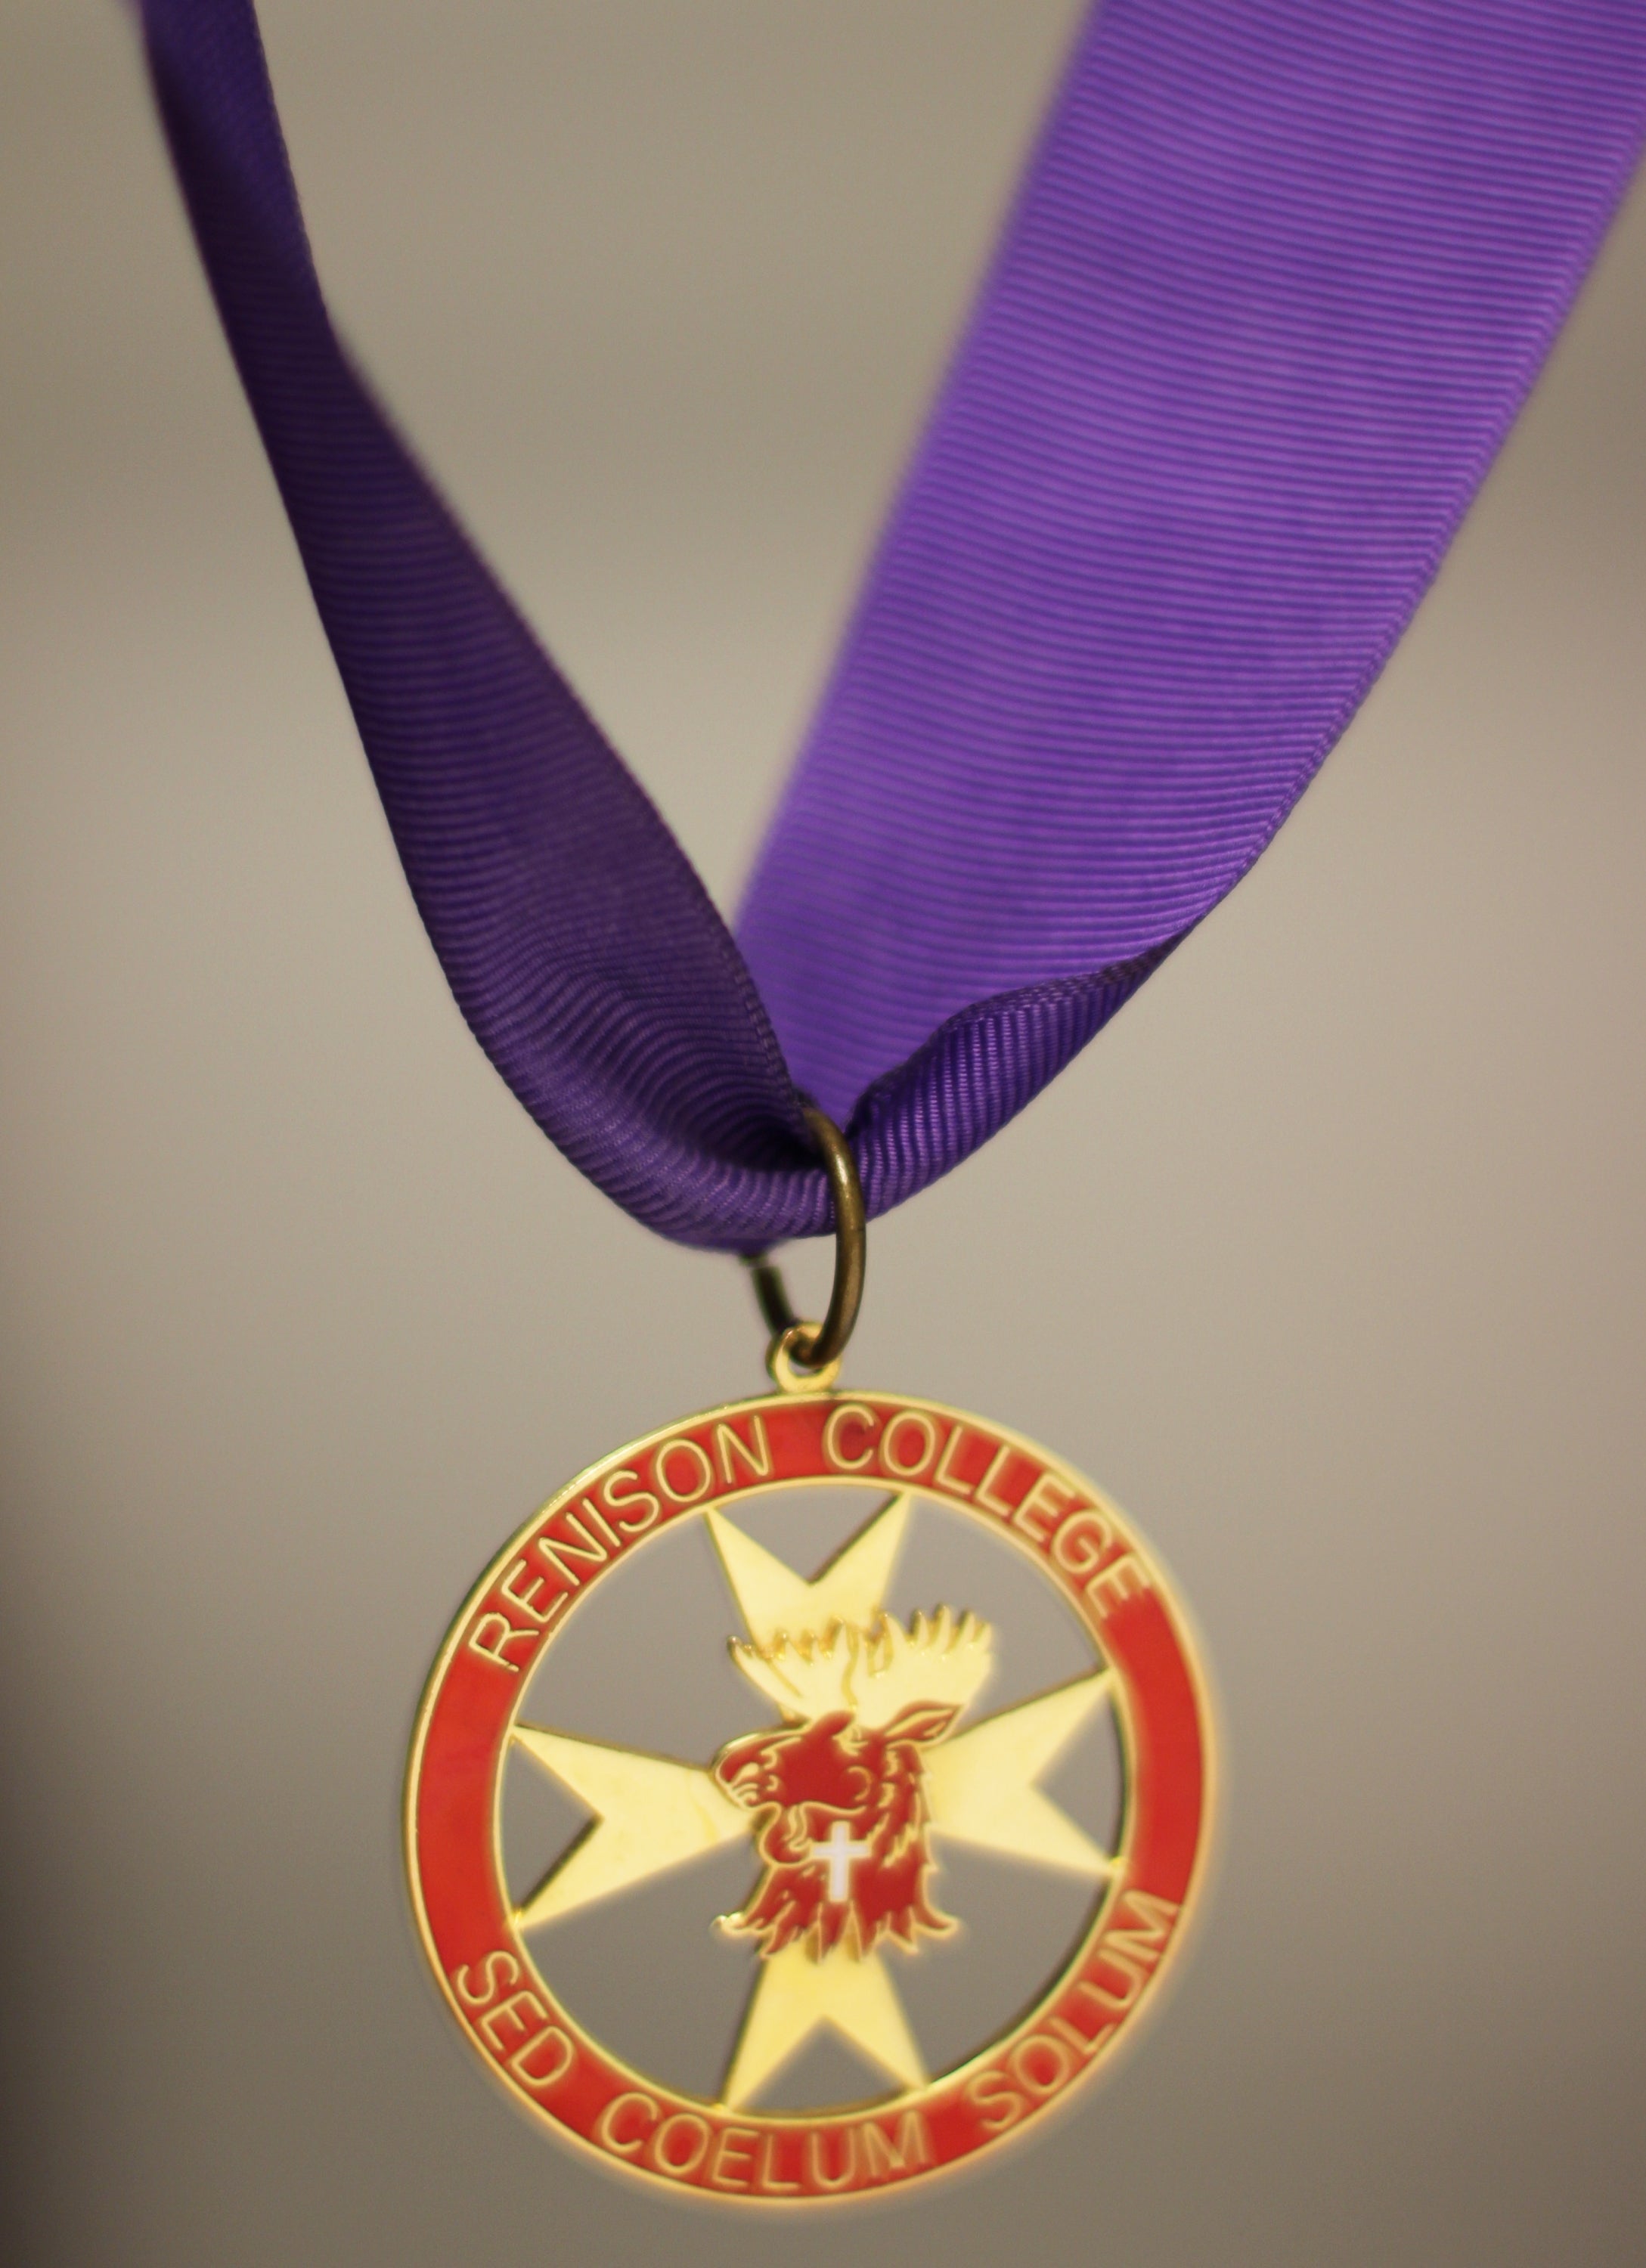 Red medal hung from a purple ribbon.